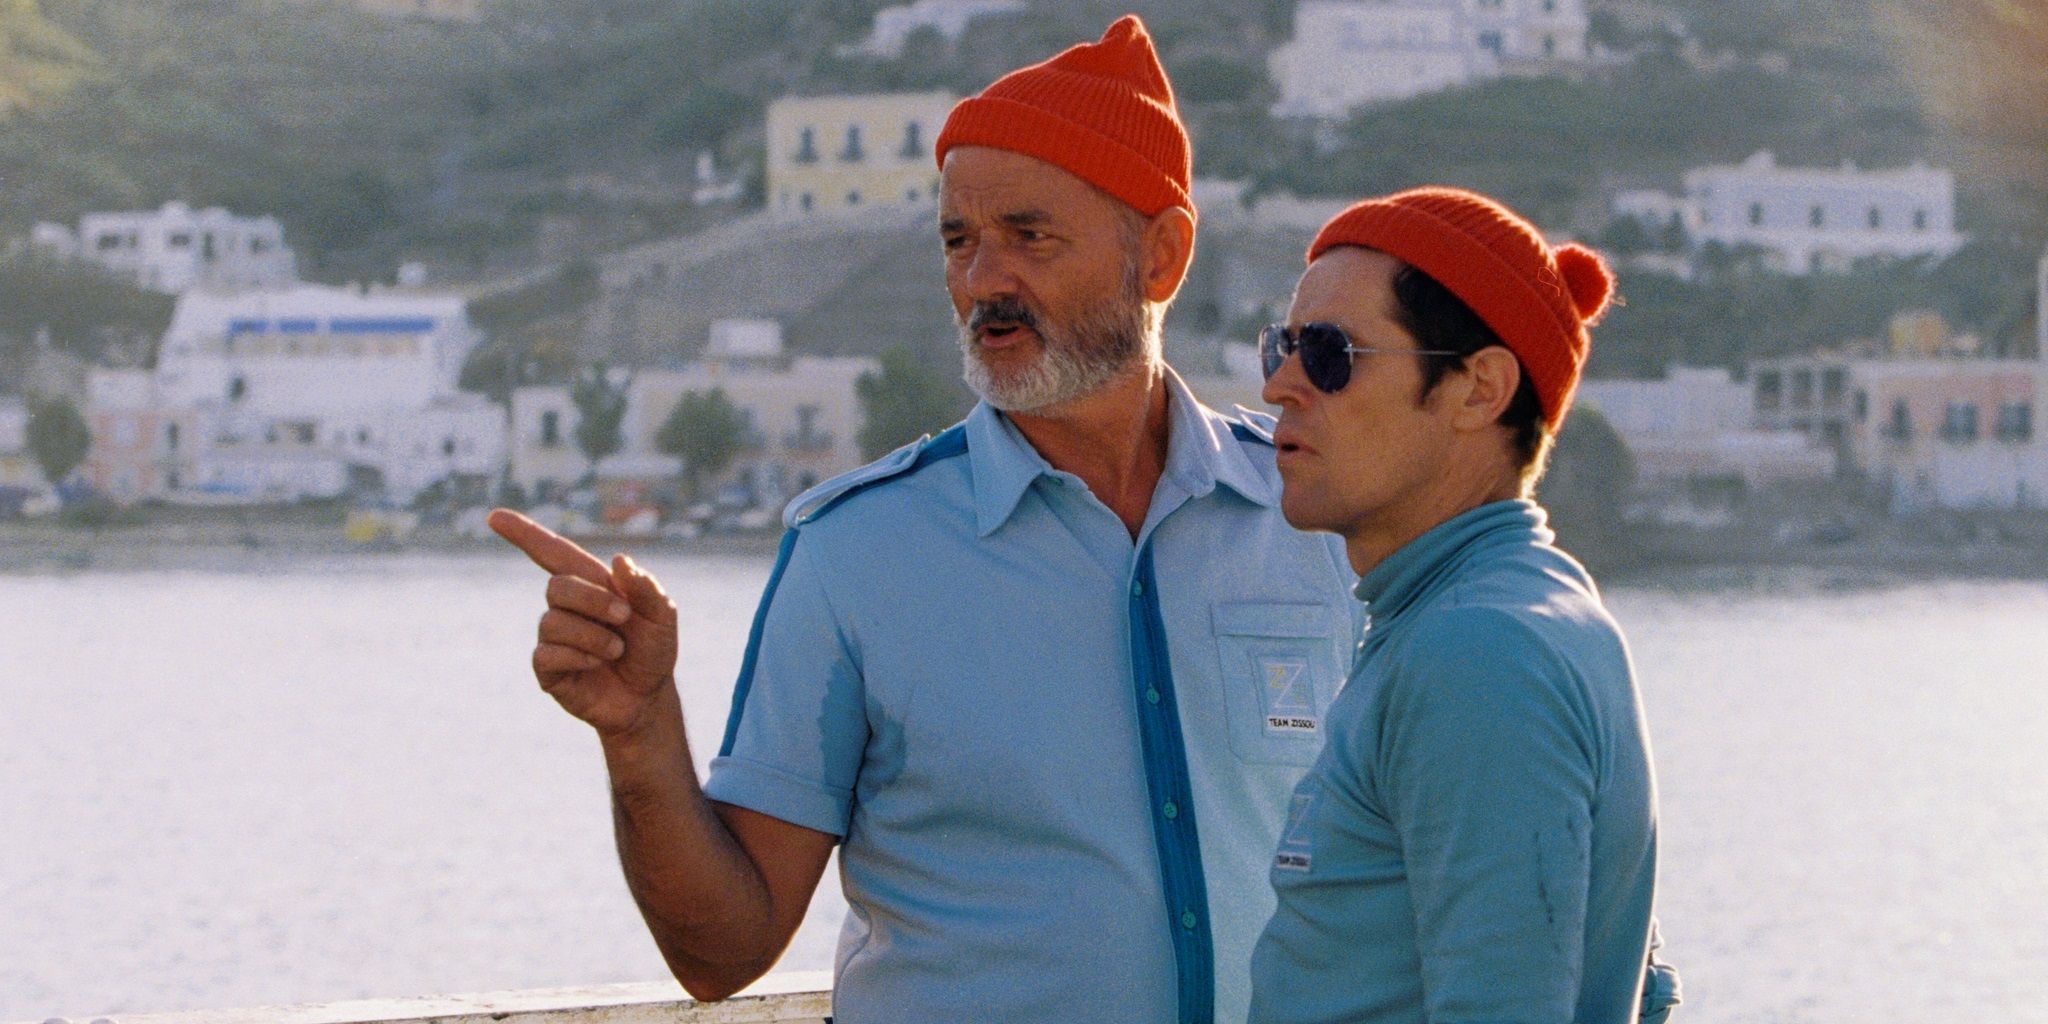 Bill Murray and Willem Dafoe in The Life Aquatic with Steve Zissou